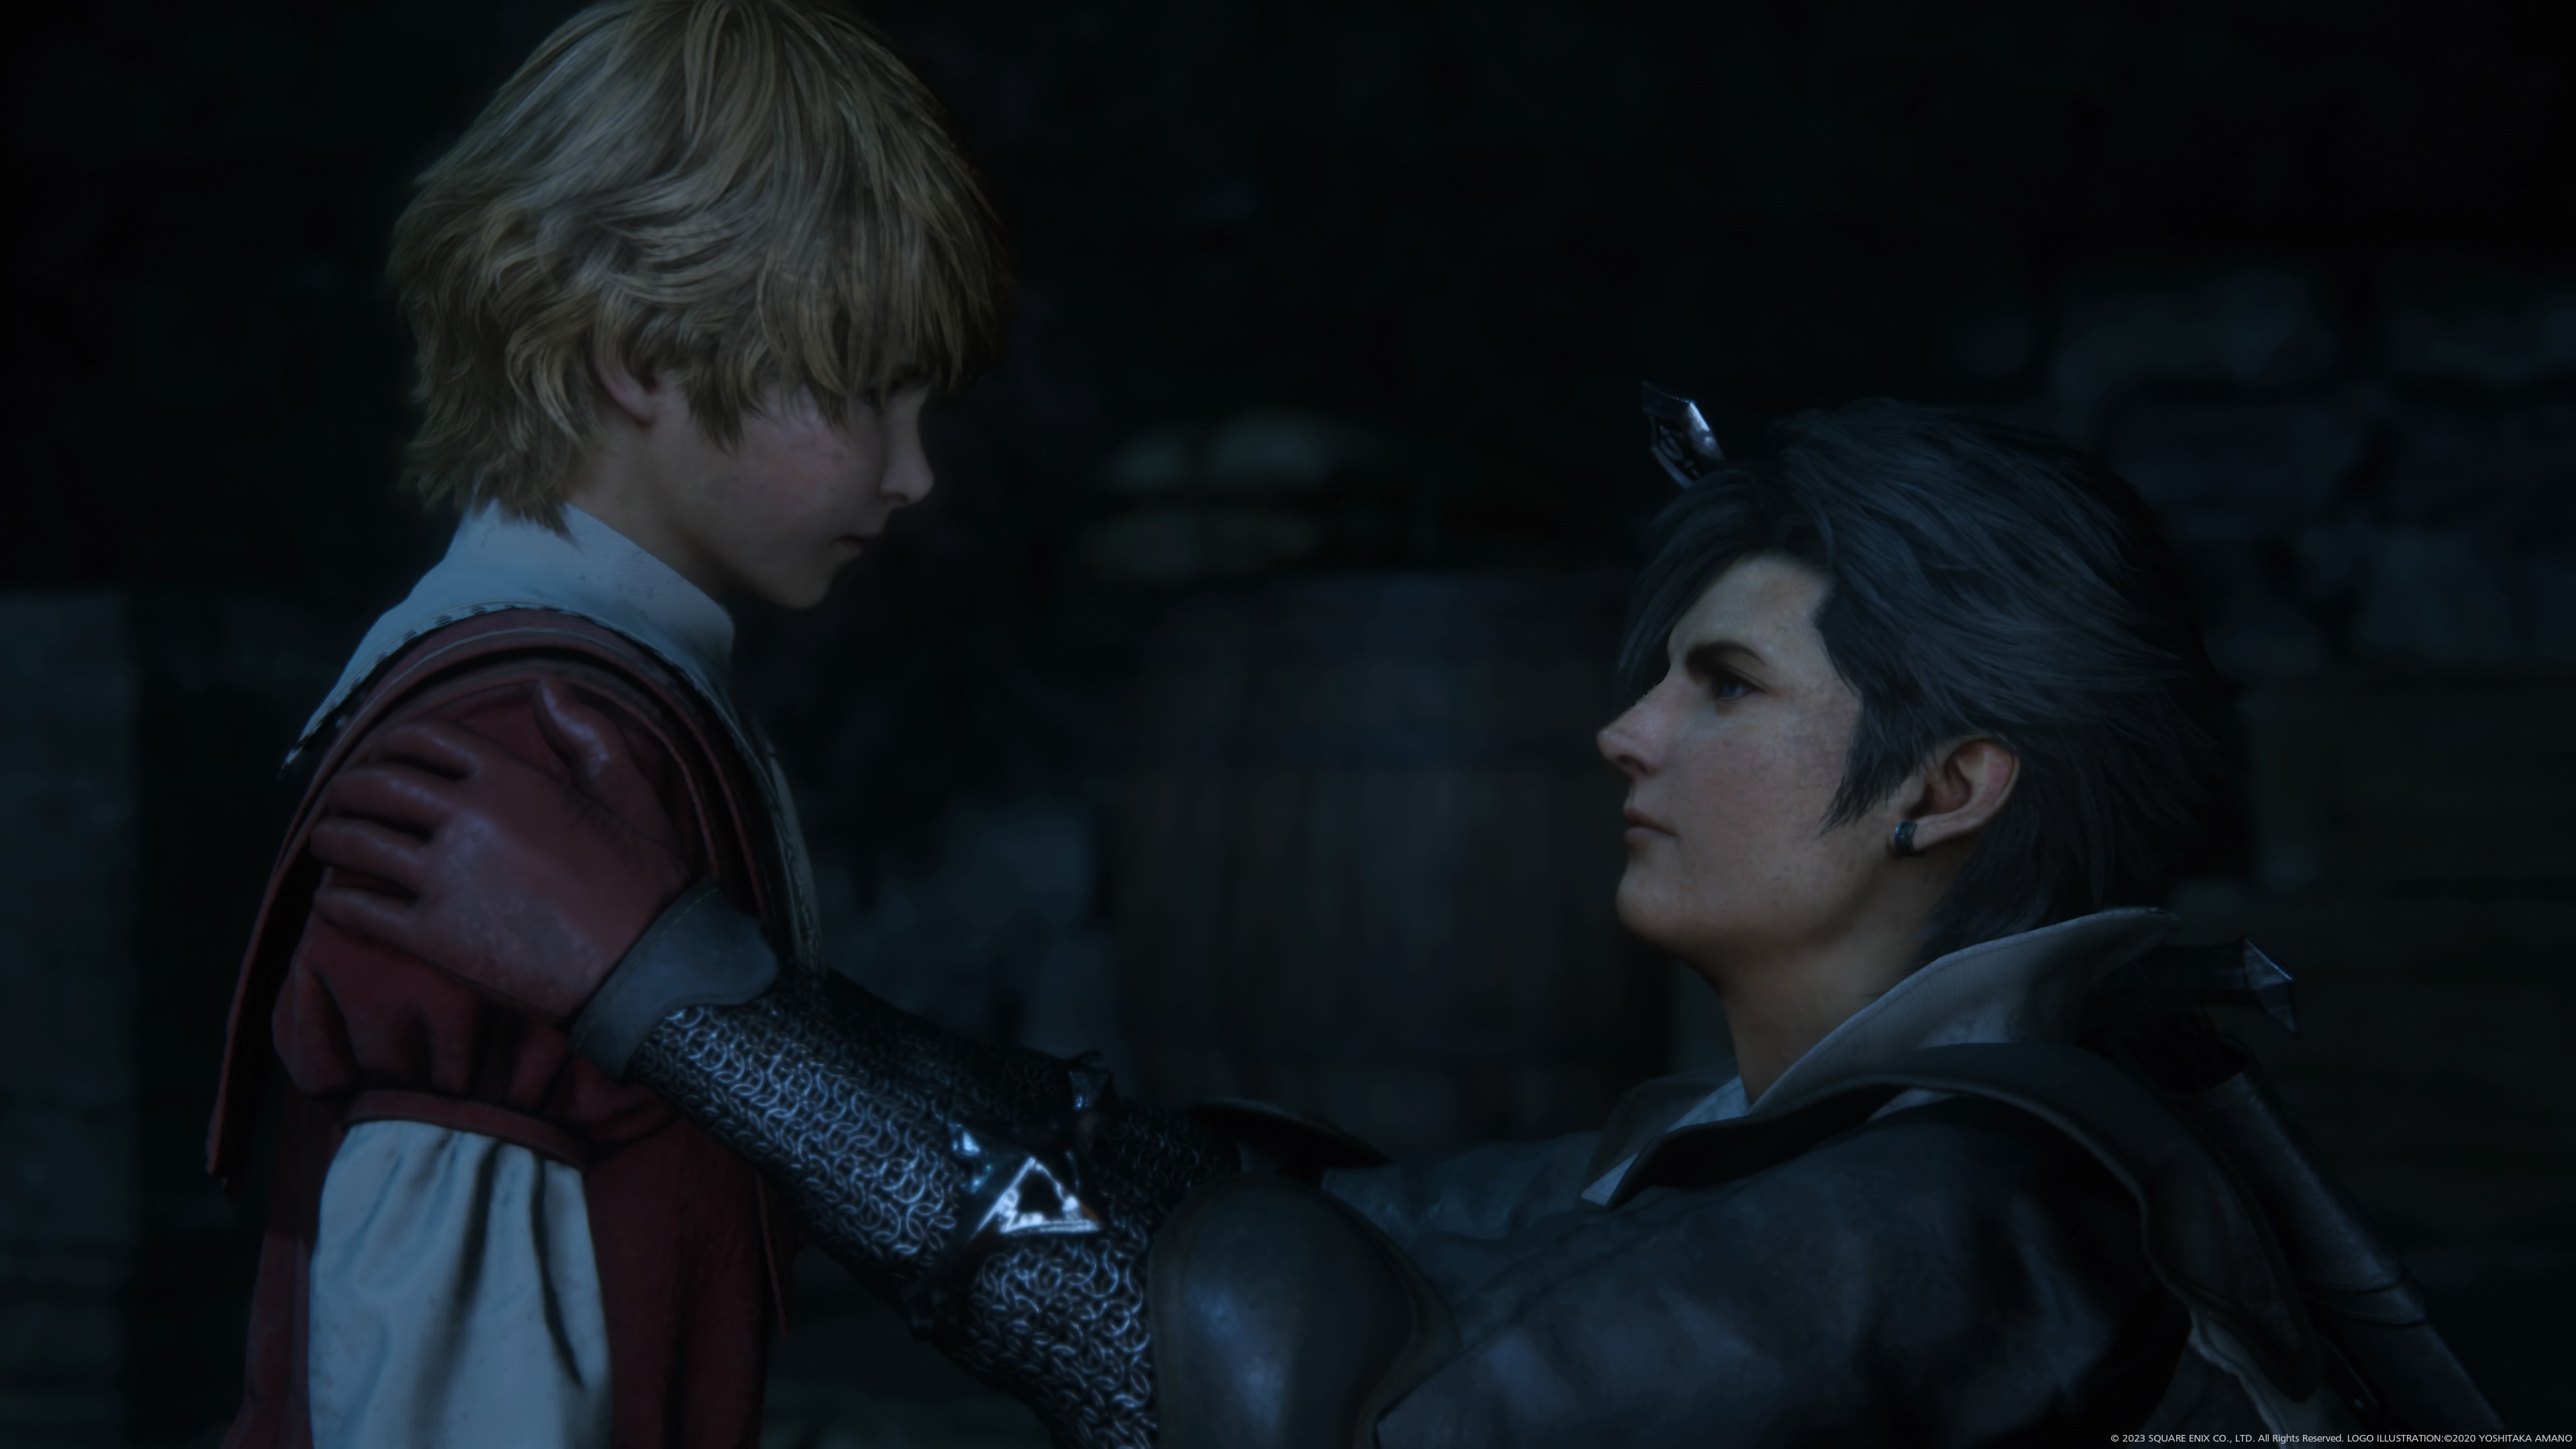 Final Fantasy 16 could be as great as the golden era FF games – if it fixes  the mistakes of the modern era